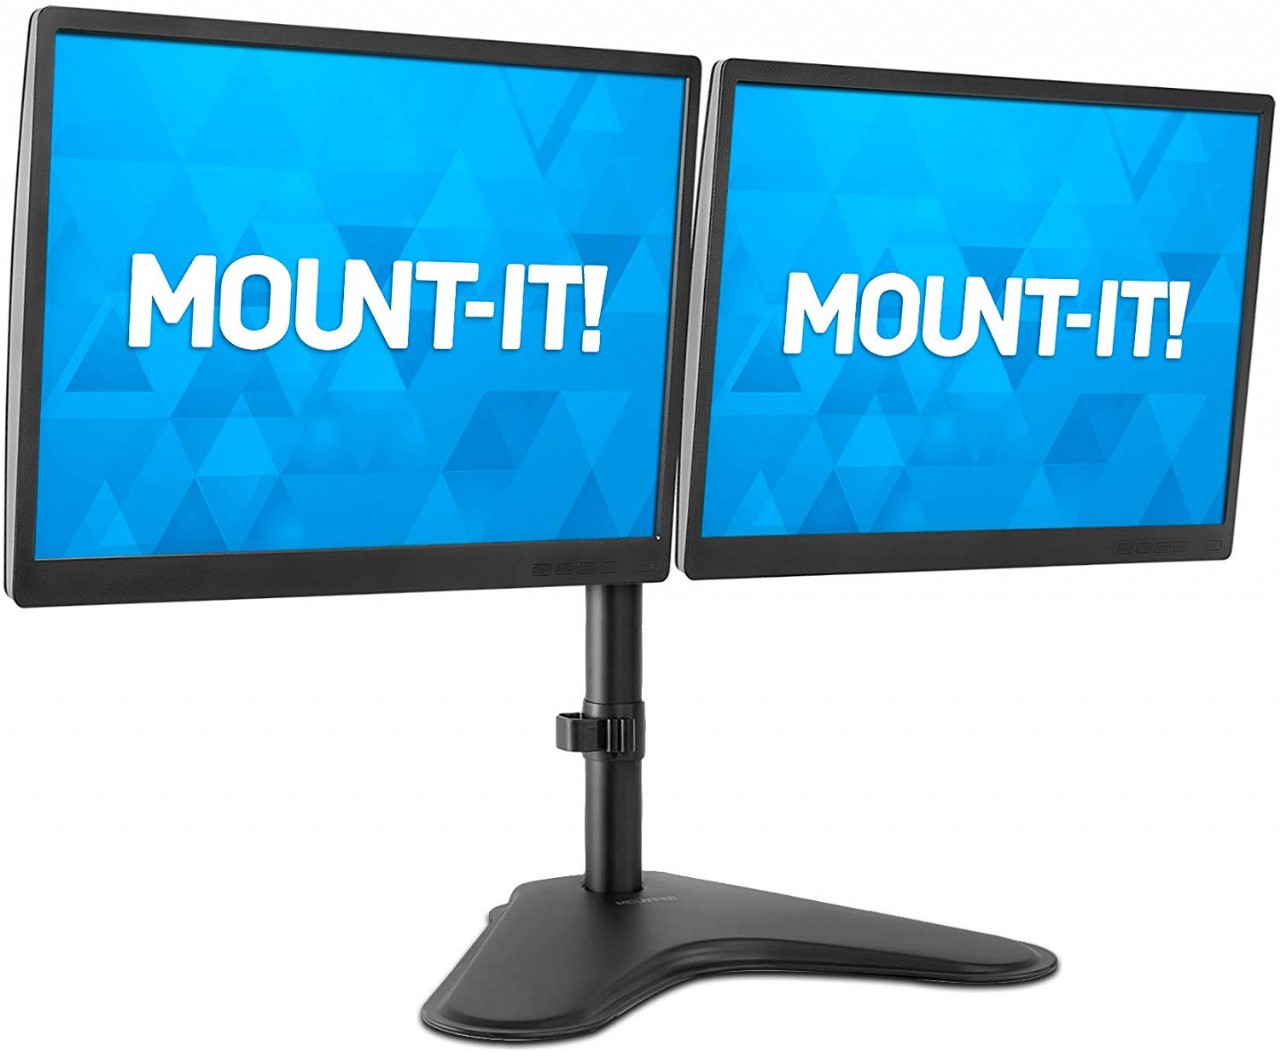 Dual Monitor Stand | Double Monitor Desk Stand Fits Two x 21 22 23 24 27 28 30 32 Inch Computer Scre